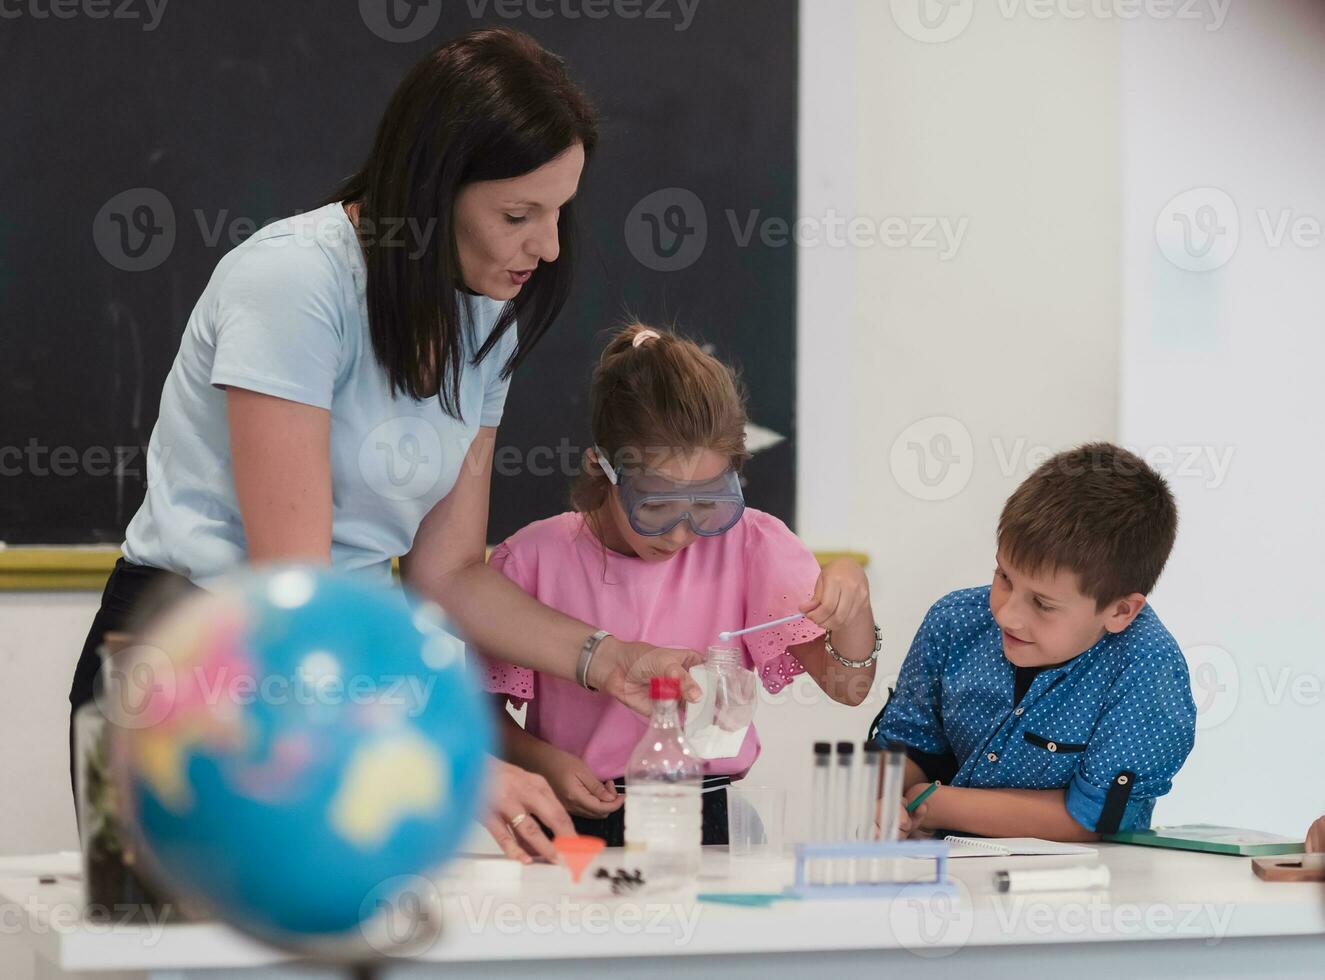 Elementary School Science Classroom Enthusiastic Teacher Explains Chemistry to Diverse Group of Children, Little Boy Mixes Chemicals in Beakers. Children Learn with Interest photo